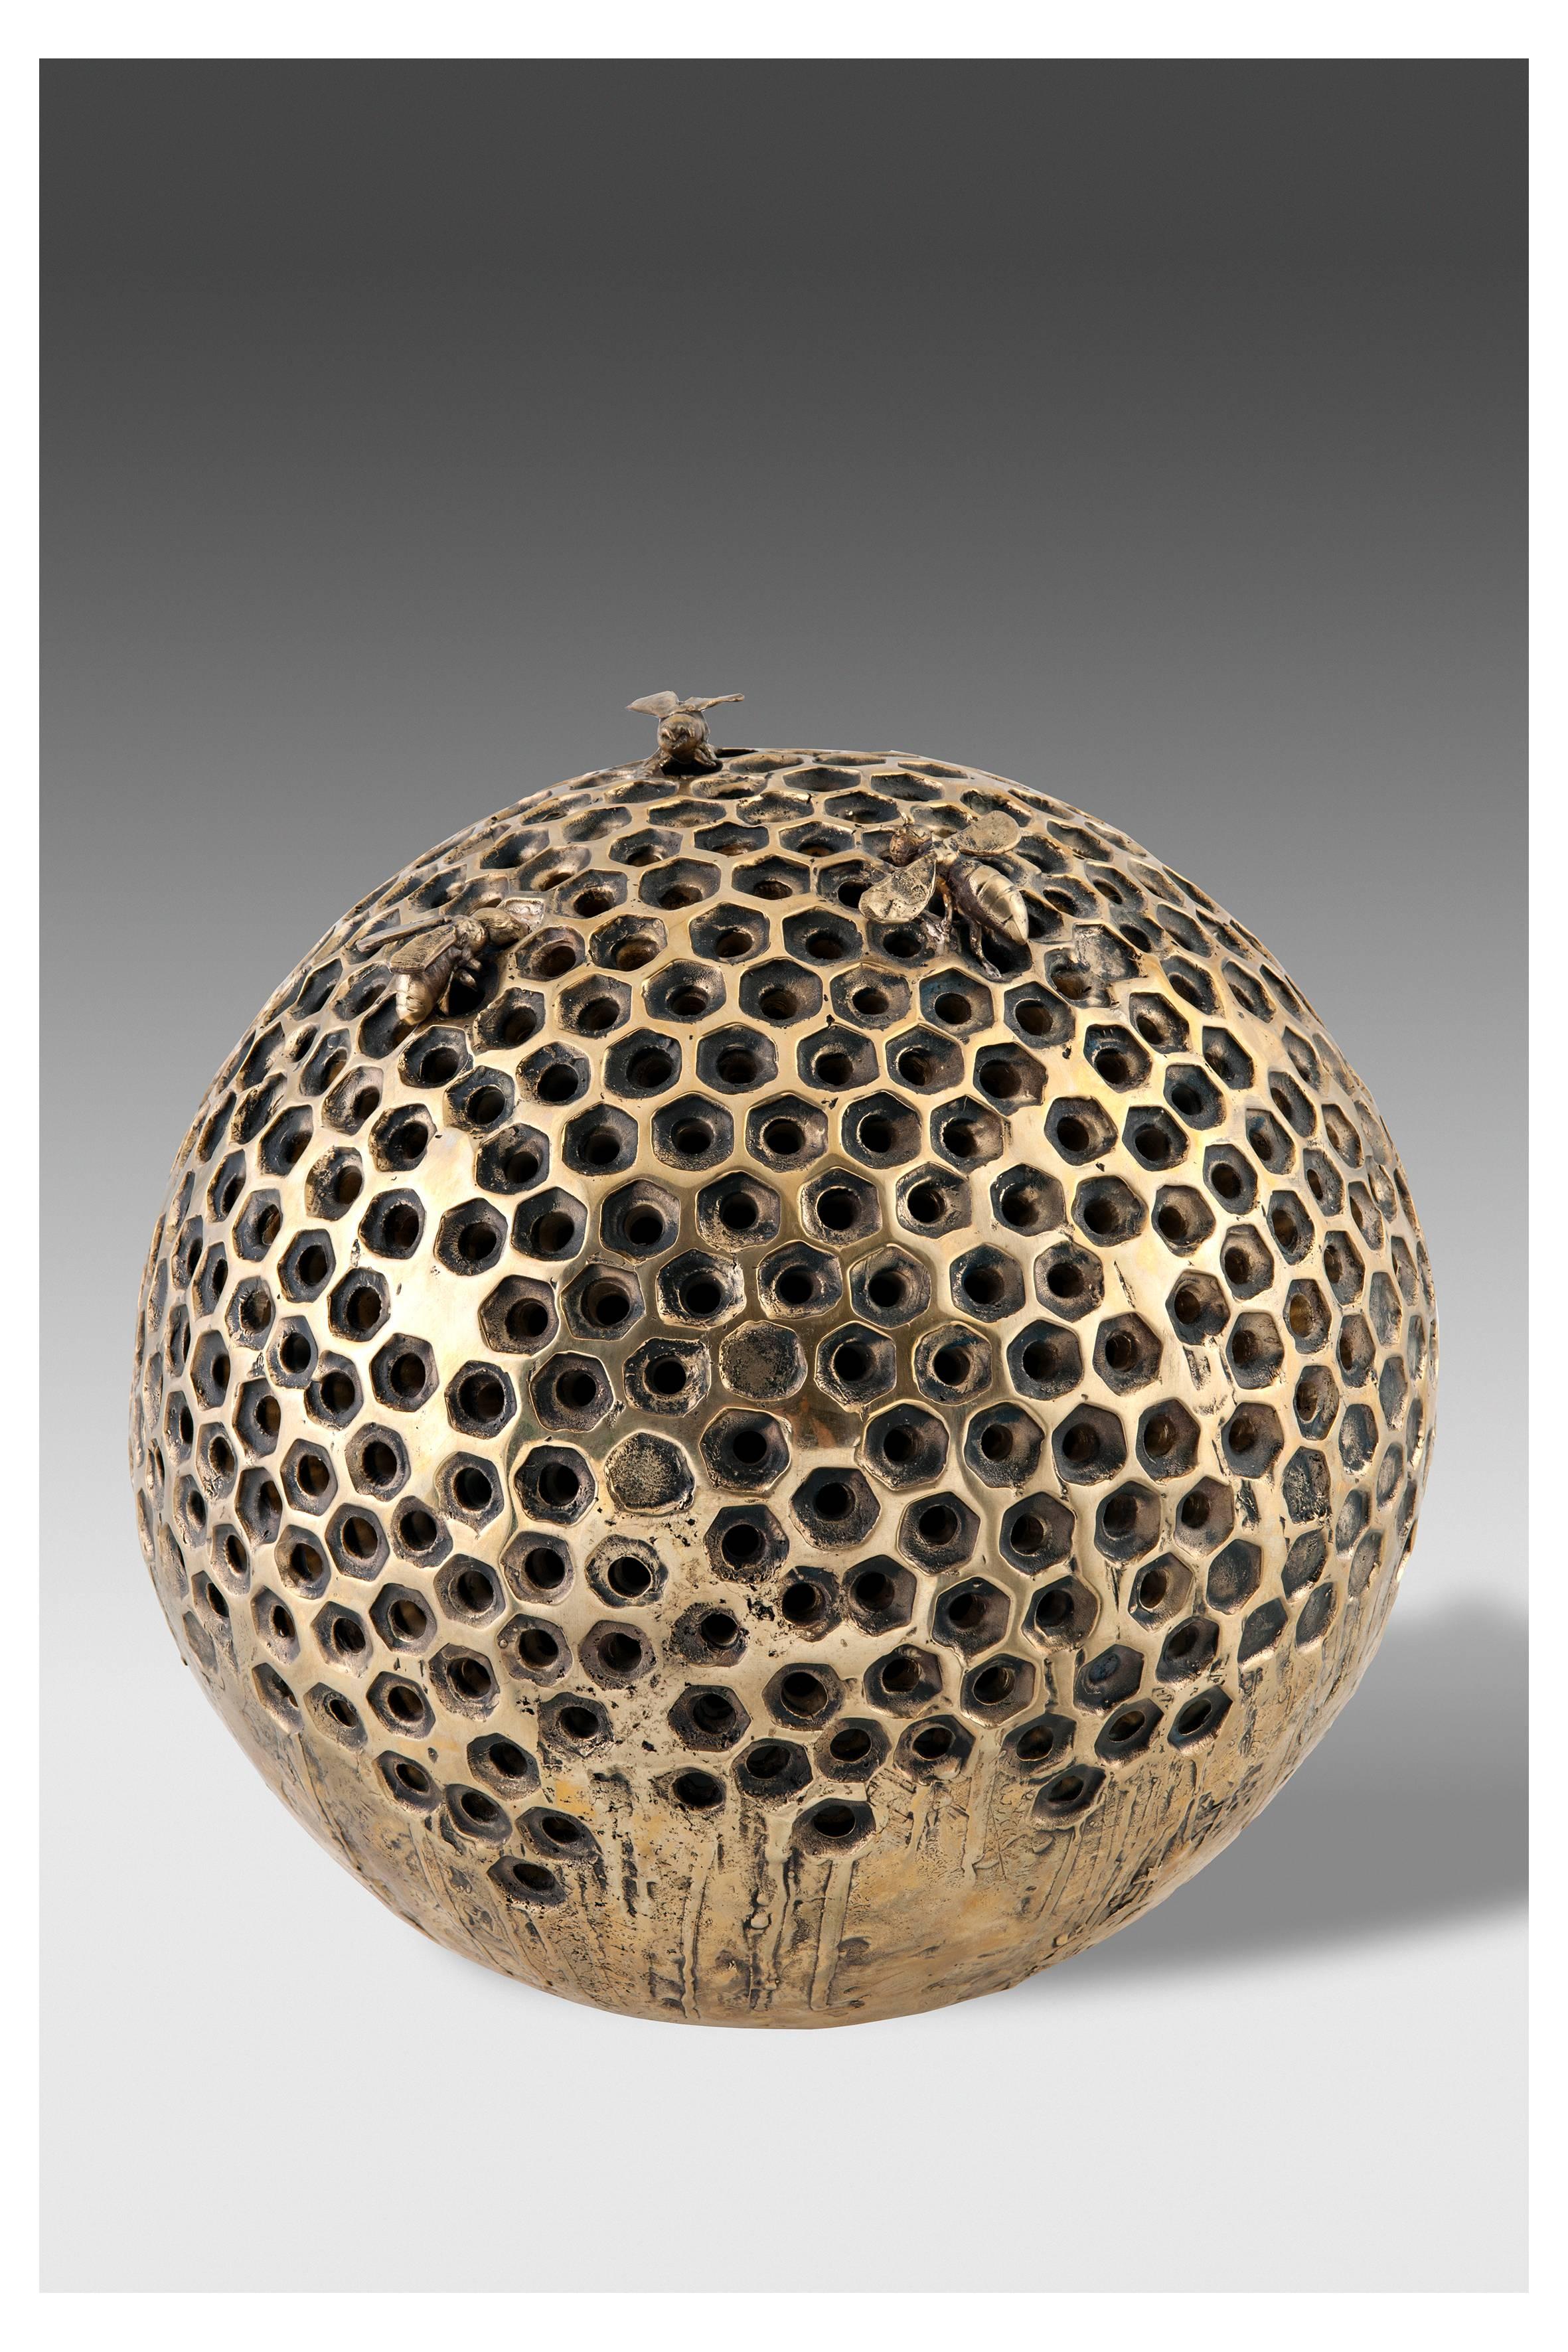 Unknown Figurative Sculpture - Honeycomb with bees 2000 by Jessica Carrol. Contemporary sculpture in bronze